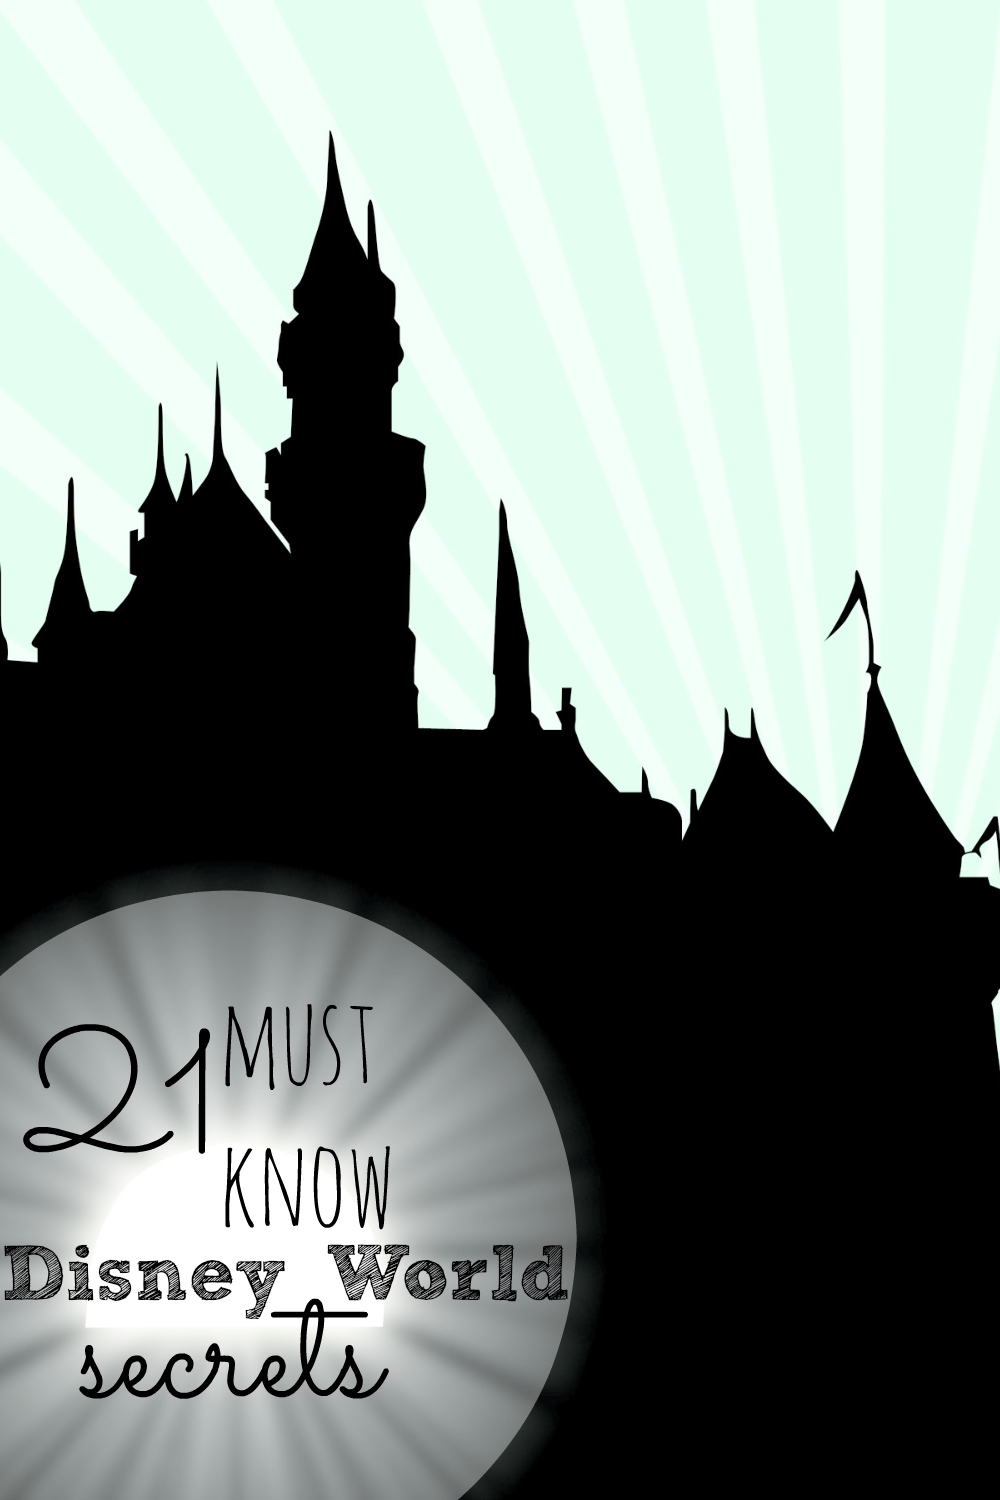 Going to Disney World? Then you need to know these secrets before you go!